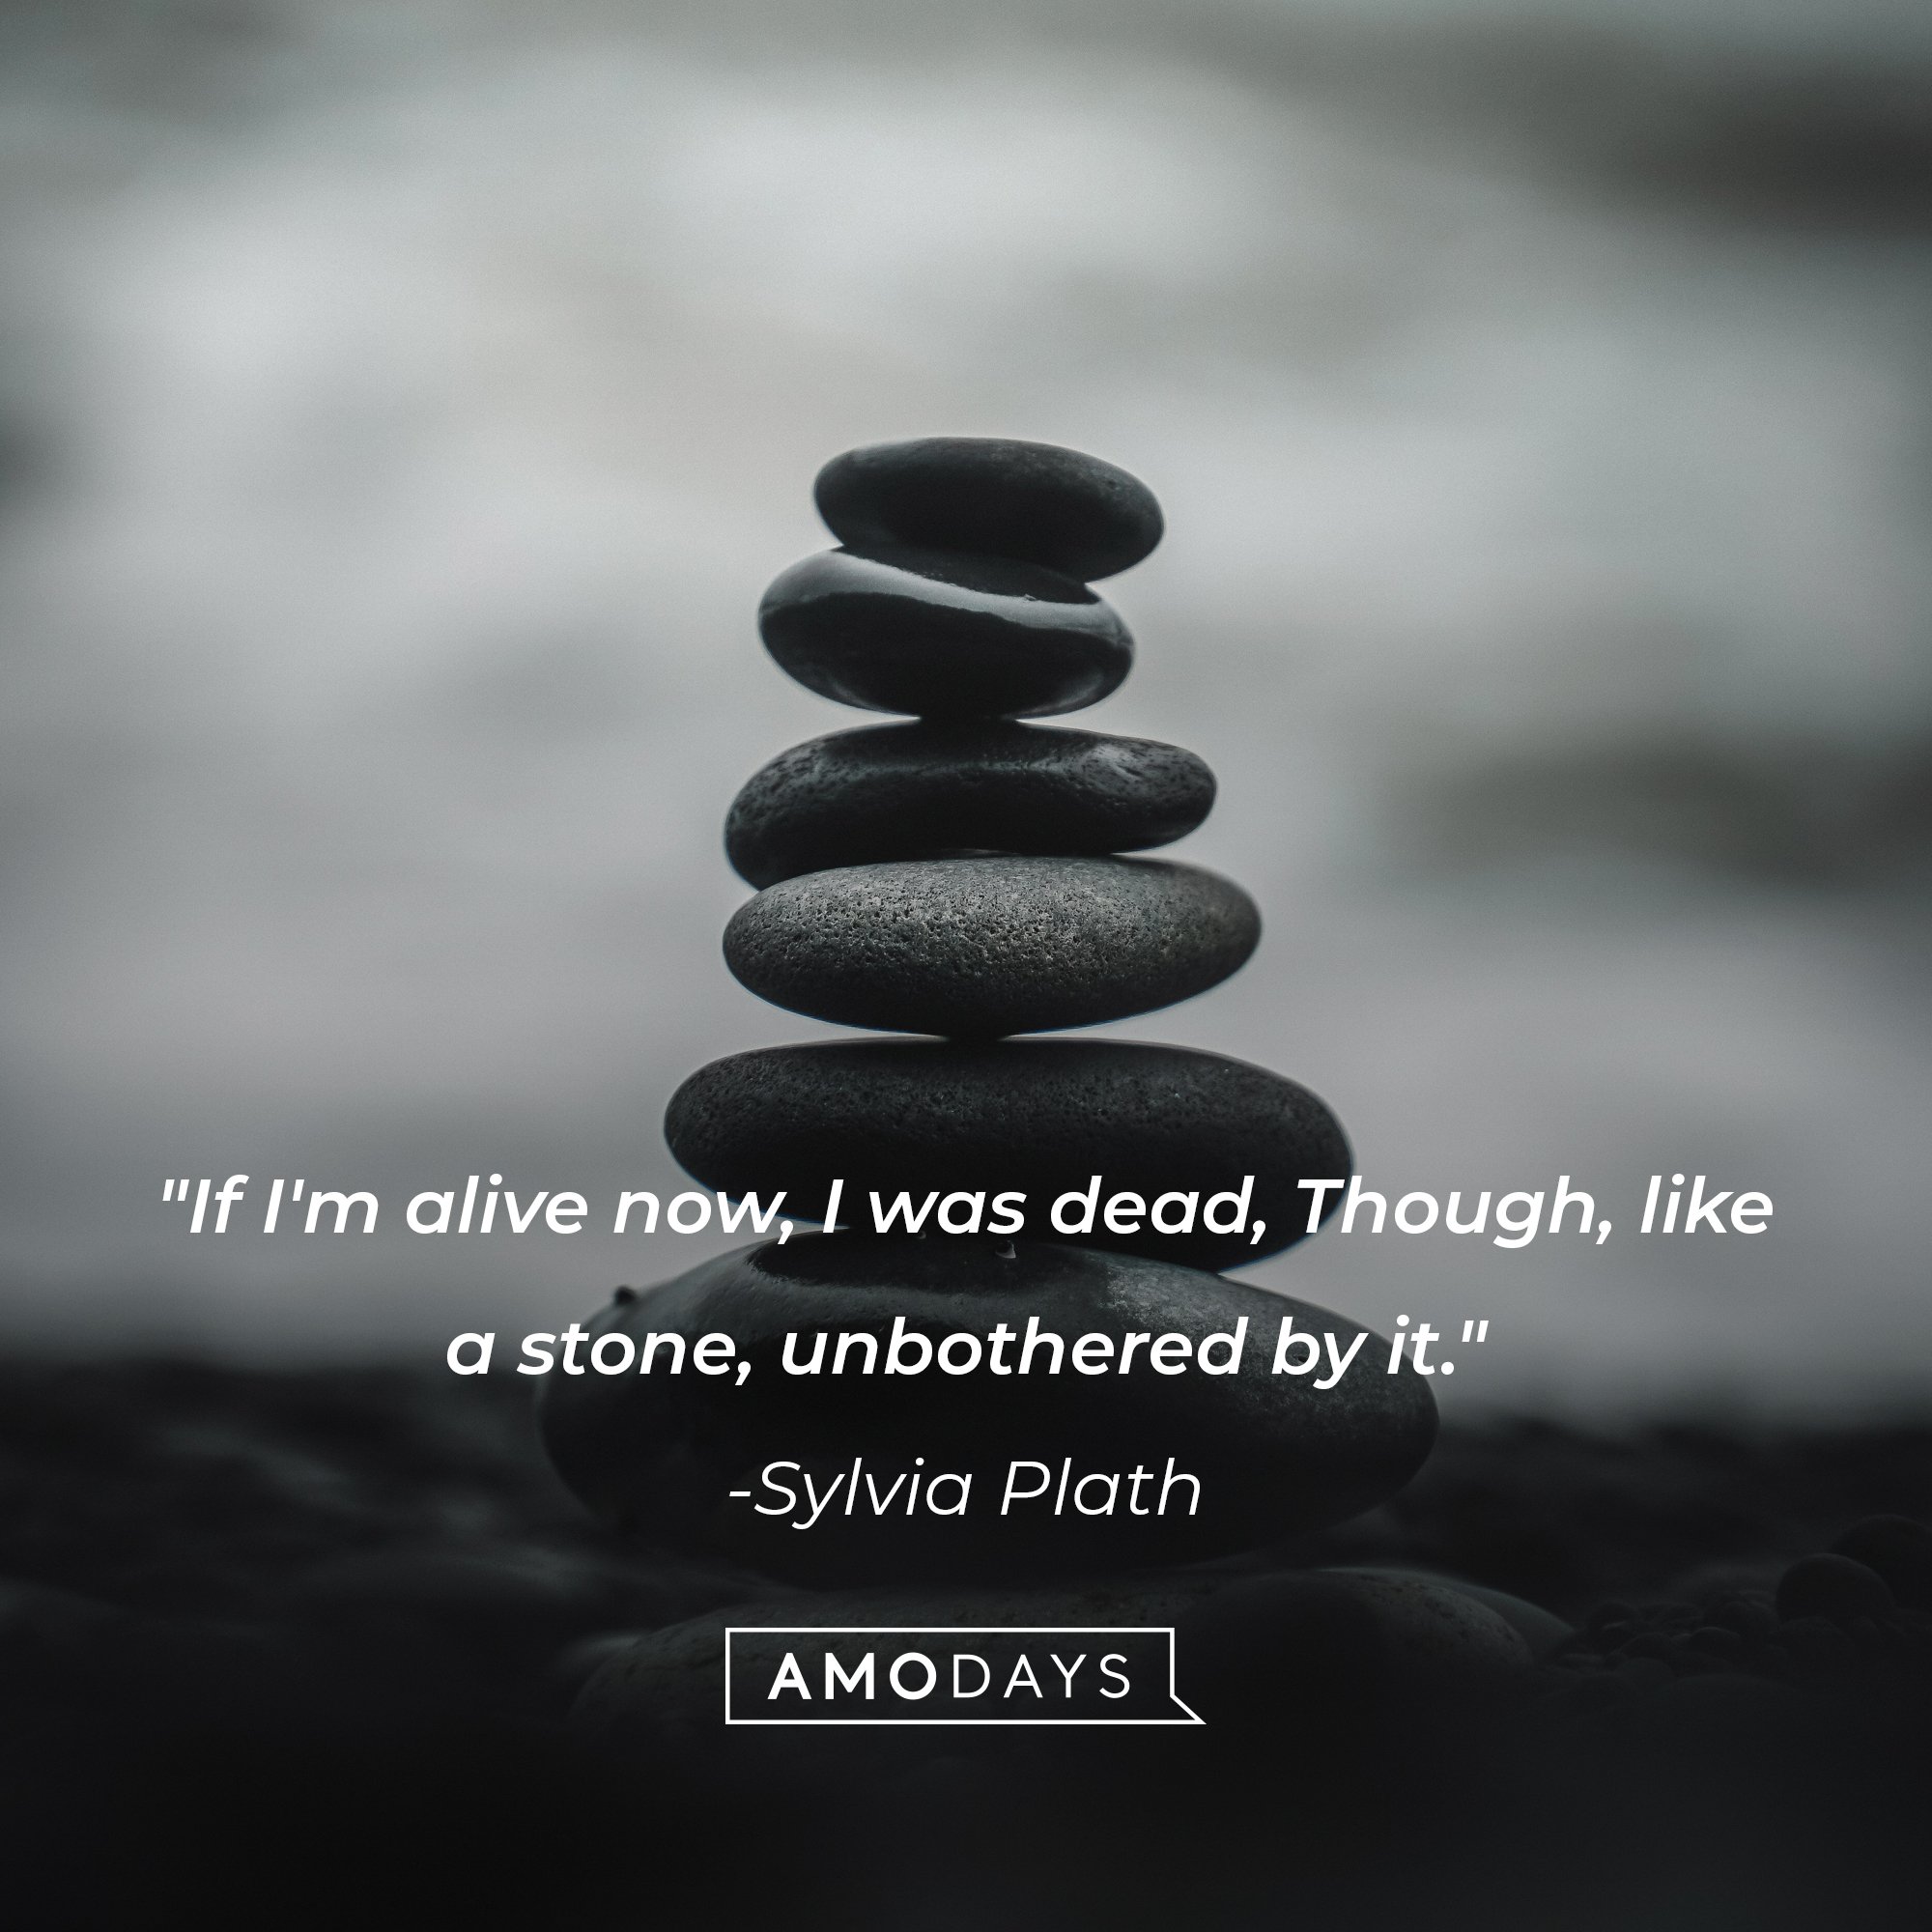  Sylvia Plath’s quote: "If I'm alive now, I was dead, Though, like a stone, unbothered by it." | Image: AmoDays